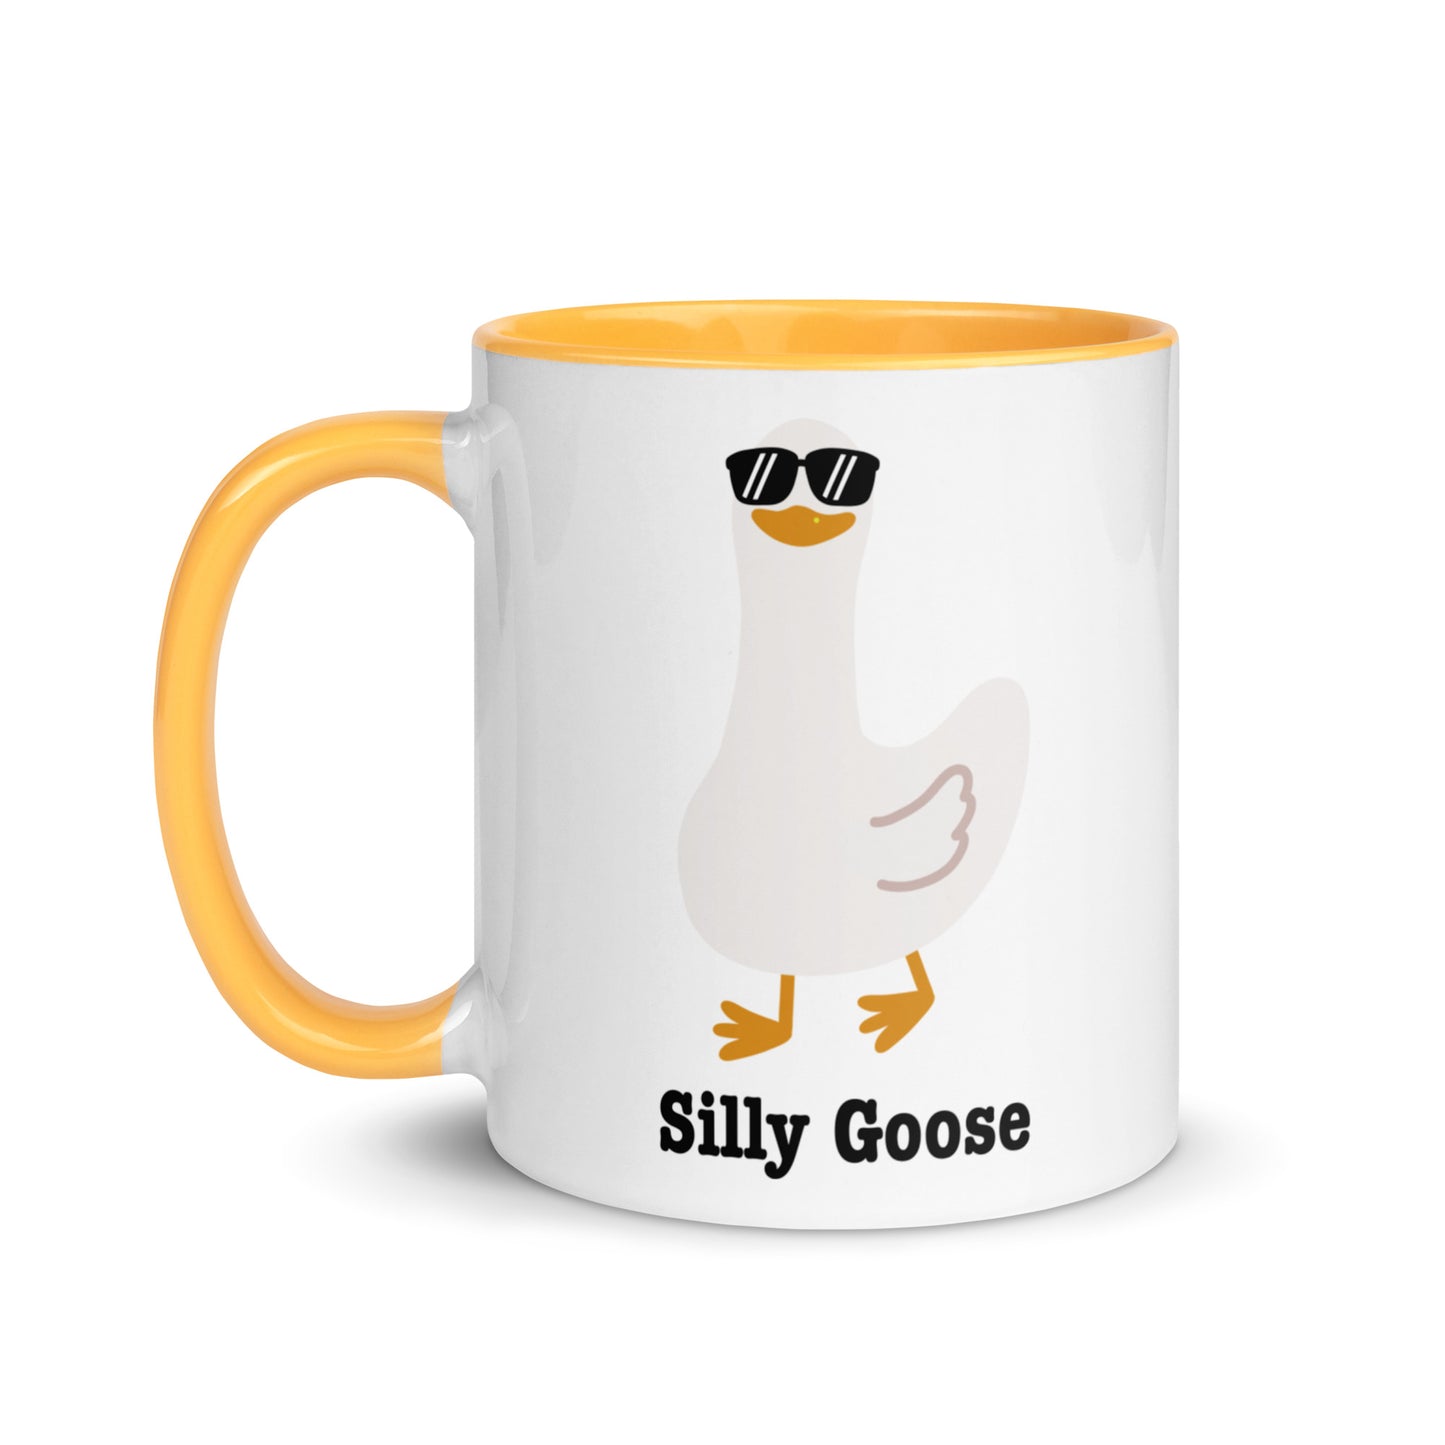 SILLY GOOSE Mug with Color